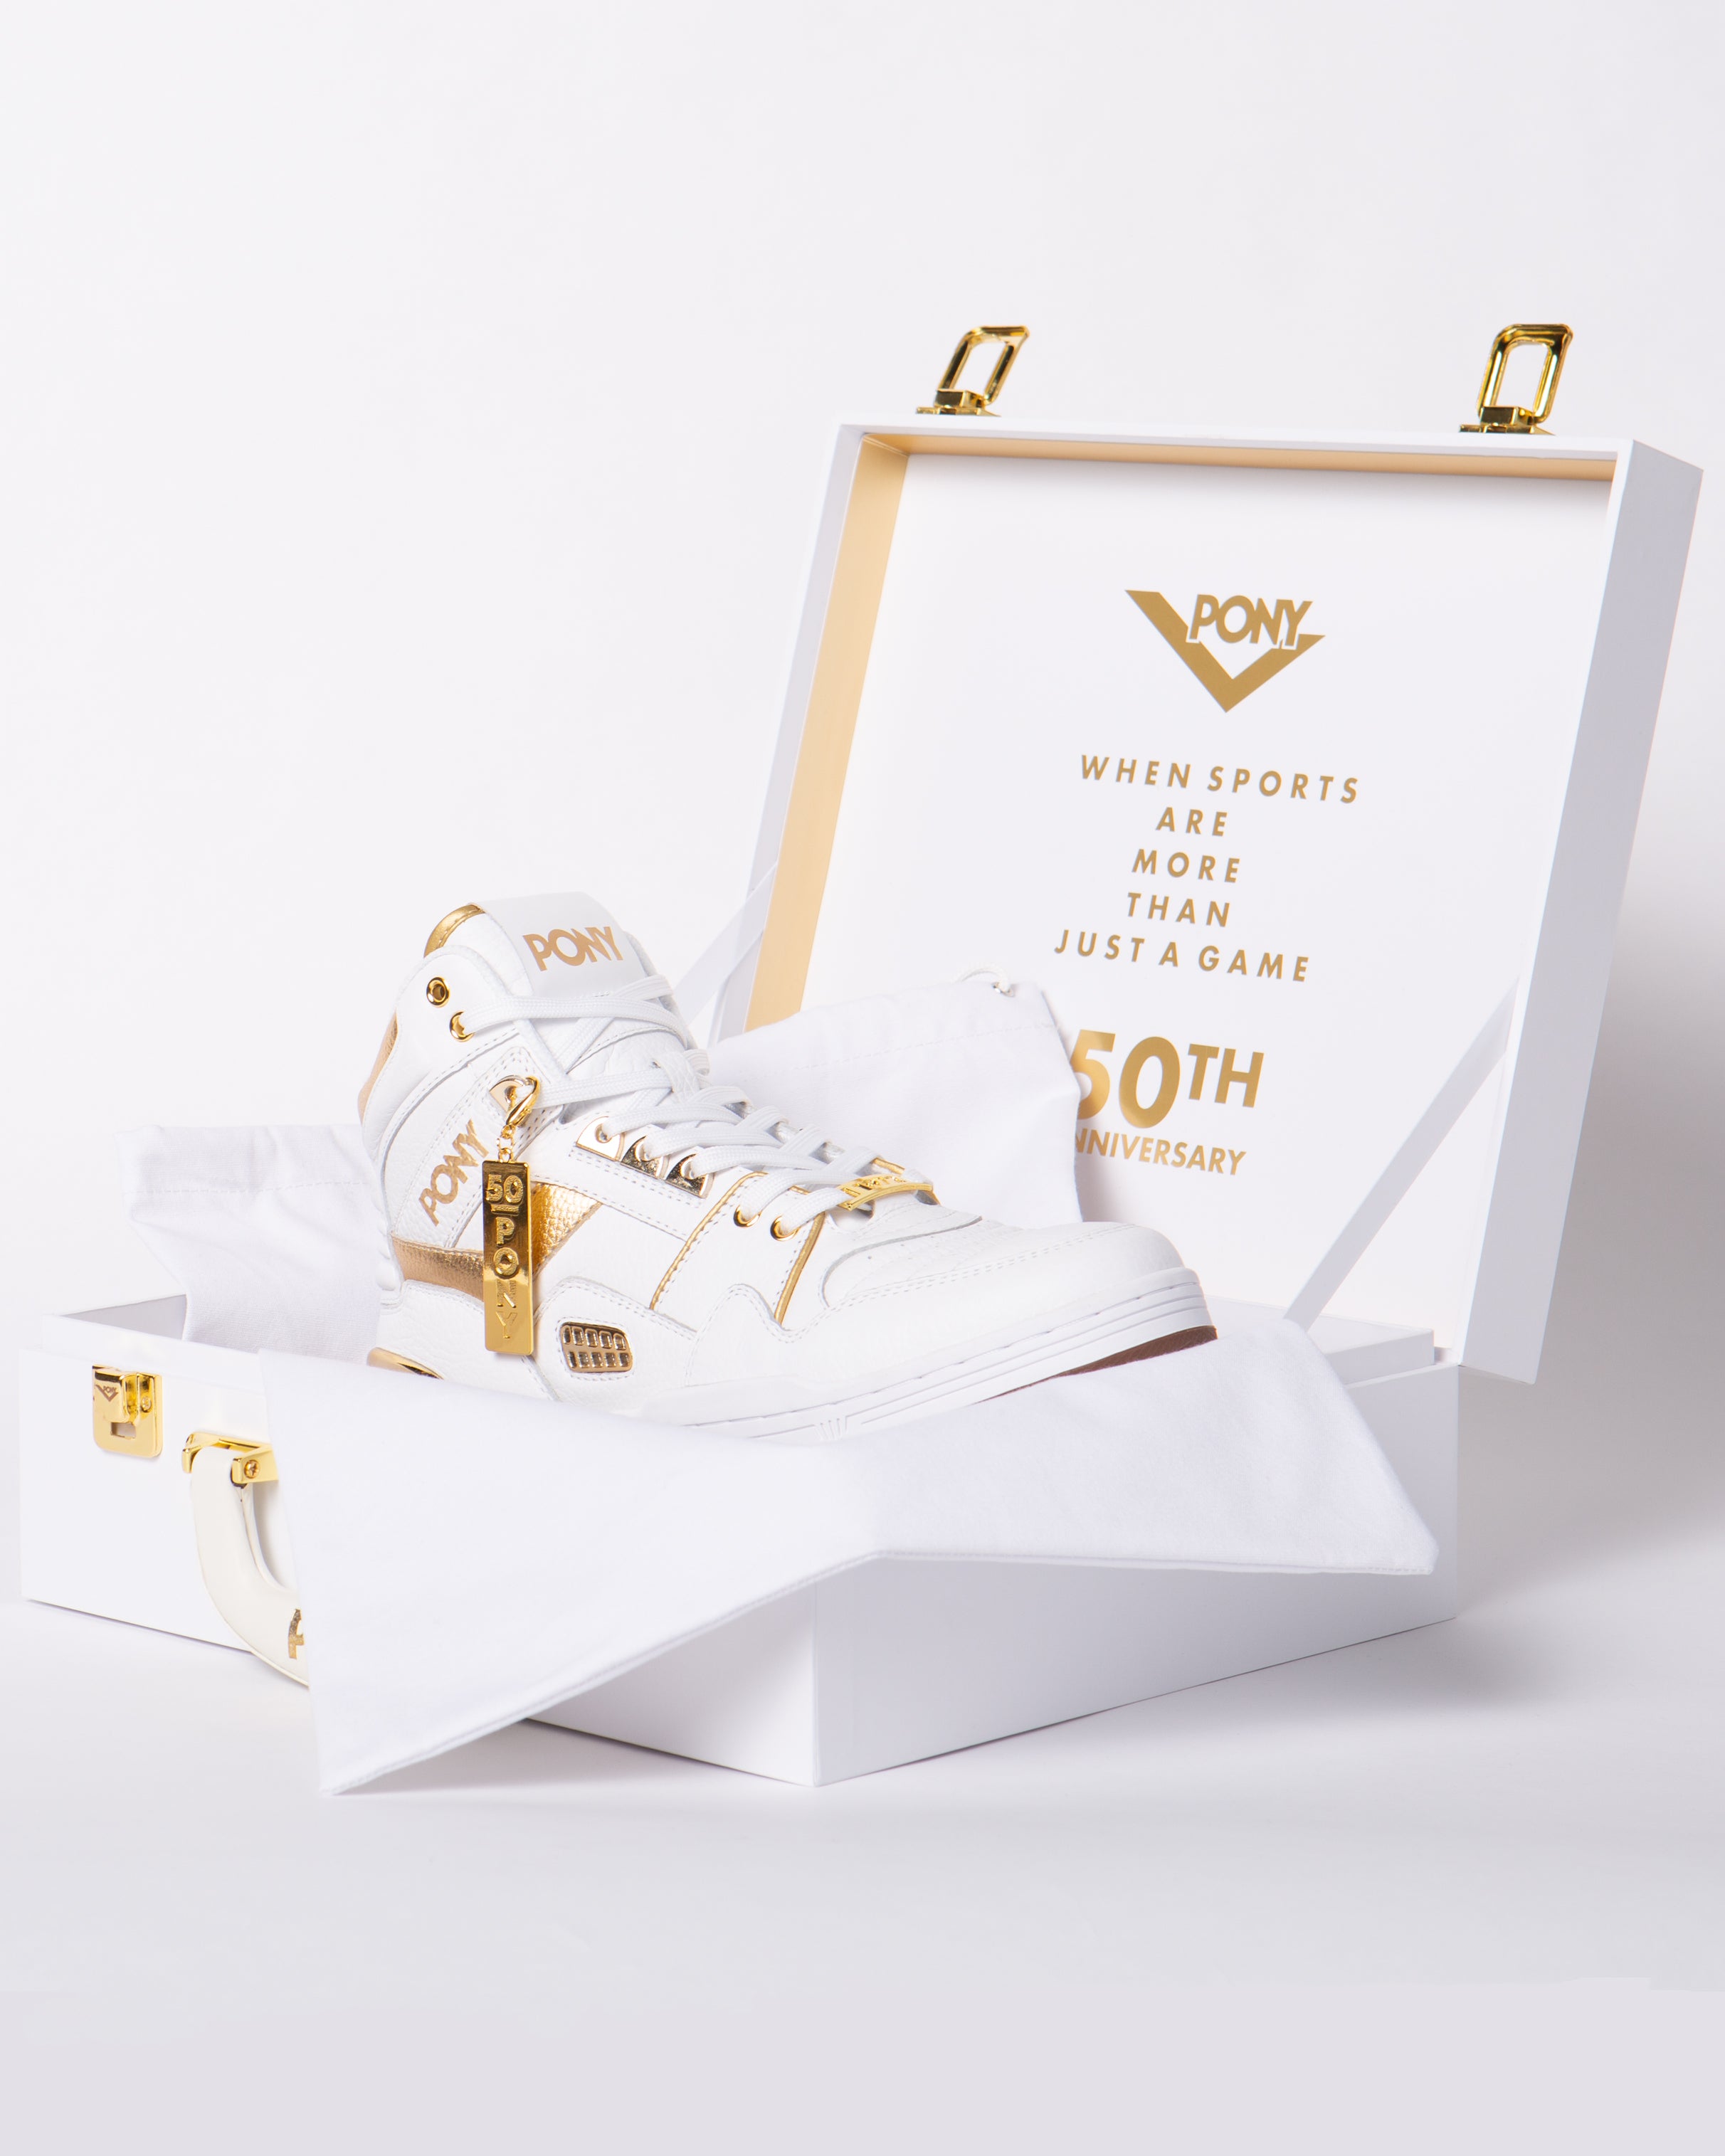 PONY 50th M100 shoe in a its matching limited edition shoebox, white with gold accents and hardware. Inside of box shows PONY lock up with "WHEN SPORTS ARE MORE THAN JUST A GAME" 50th Anniversary on the inside.